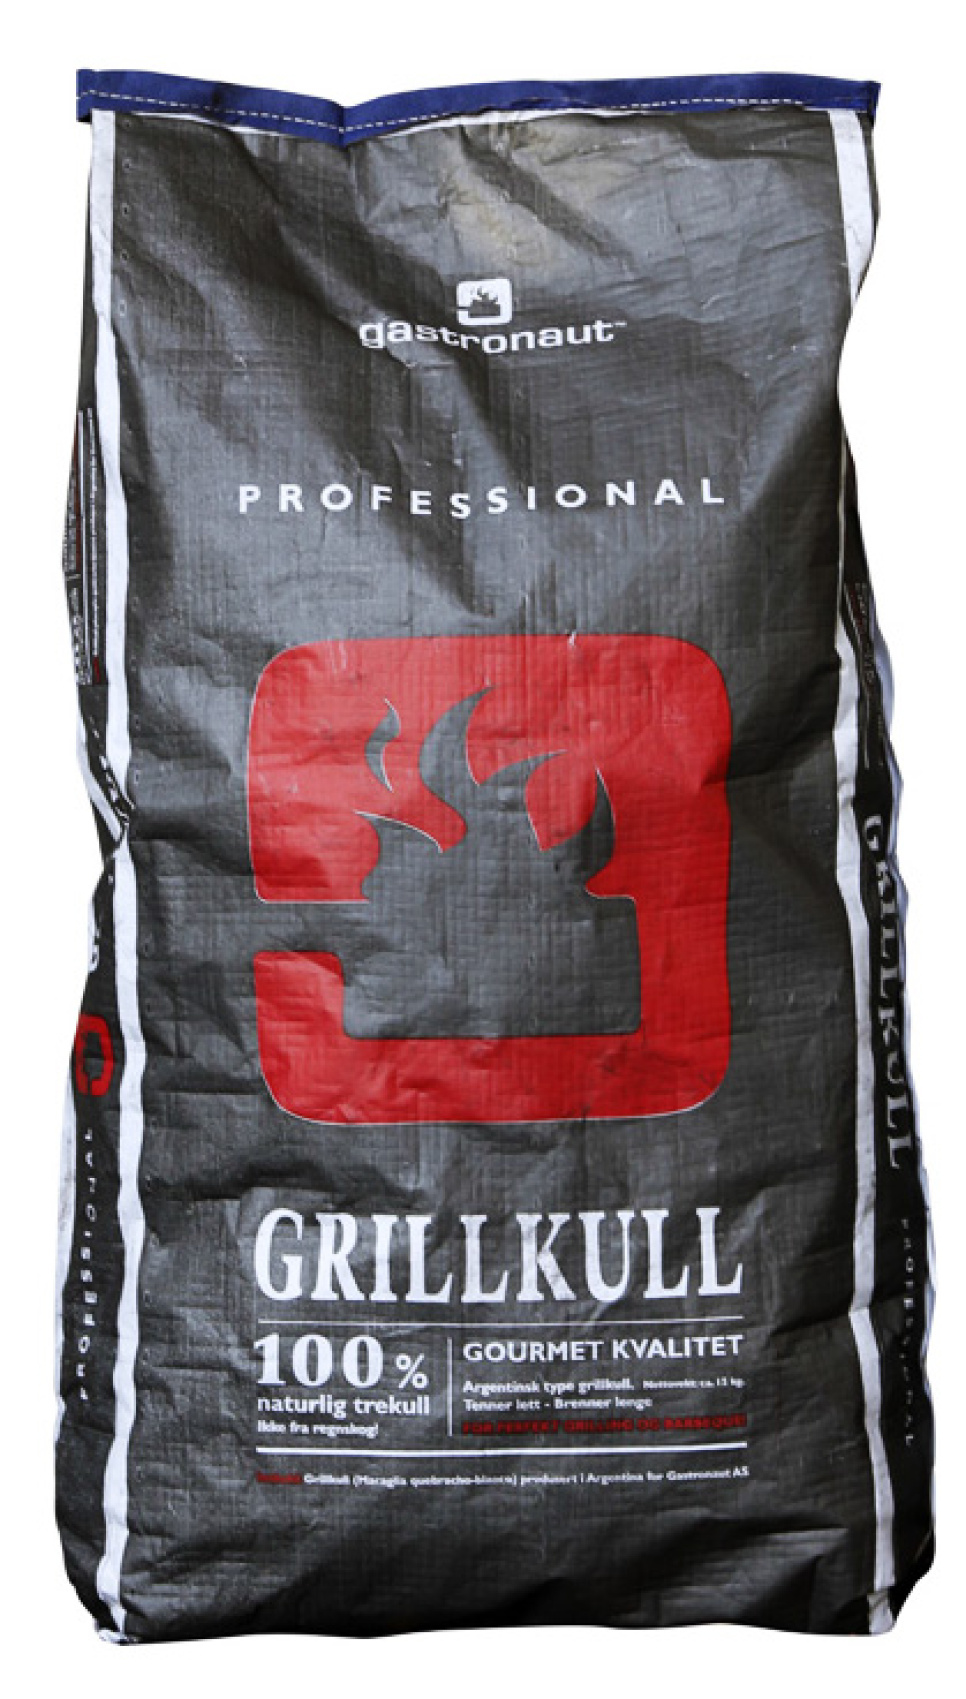 Grillkol, Professional Lumpwood, 15 kg - Gastronaut in the group Barbecues, Stoves & Ovens / Barbecue charcoal & briquettes at KitchenLab (1087-27580)